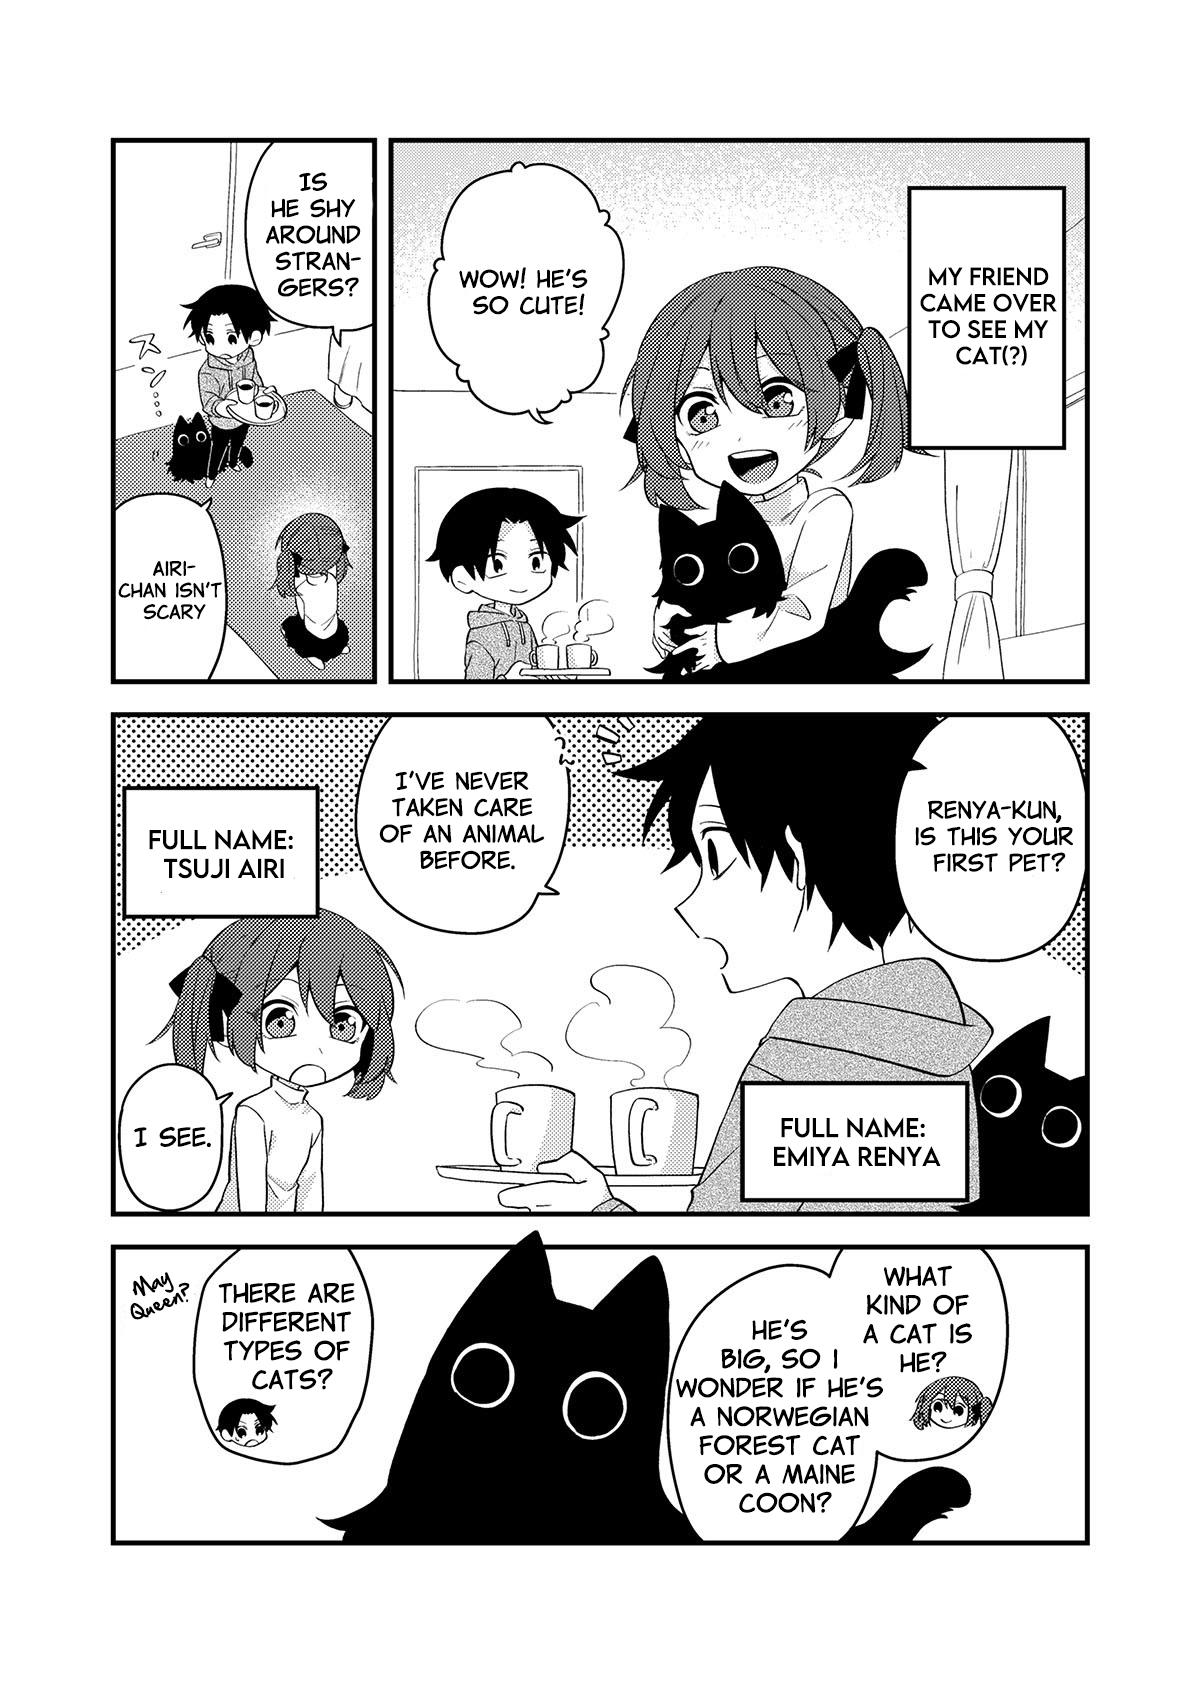 Neko no You na Nanika - Chapter 5806 - At first I thought it must be Something - Image 1